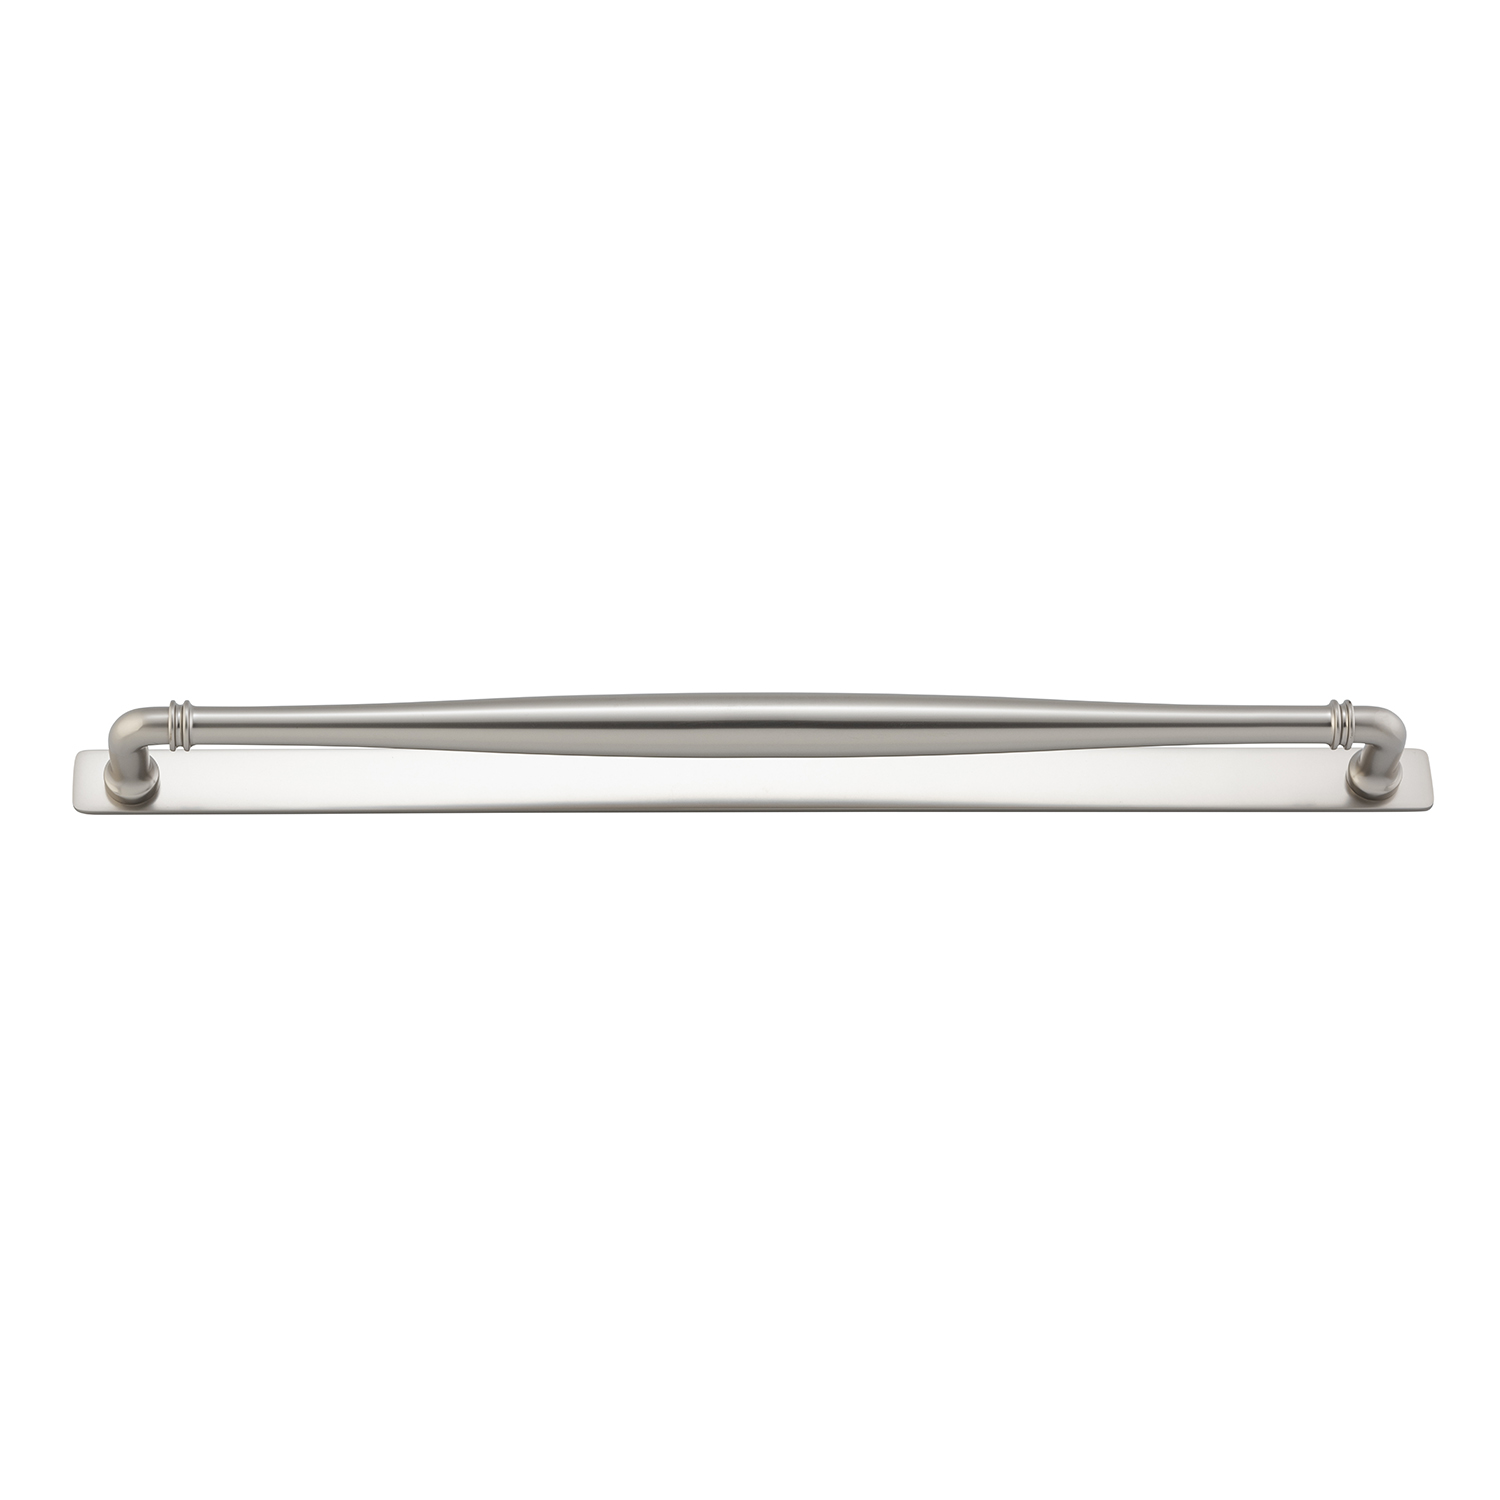 21109B - Sarlat Cabinet Pull with Backplate - CTC450mm - Satin Nickel